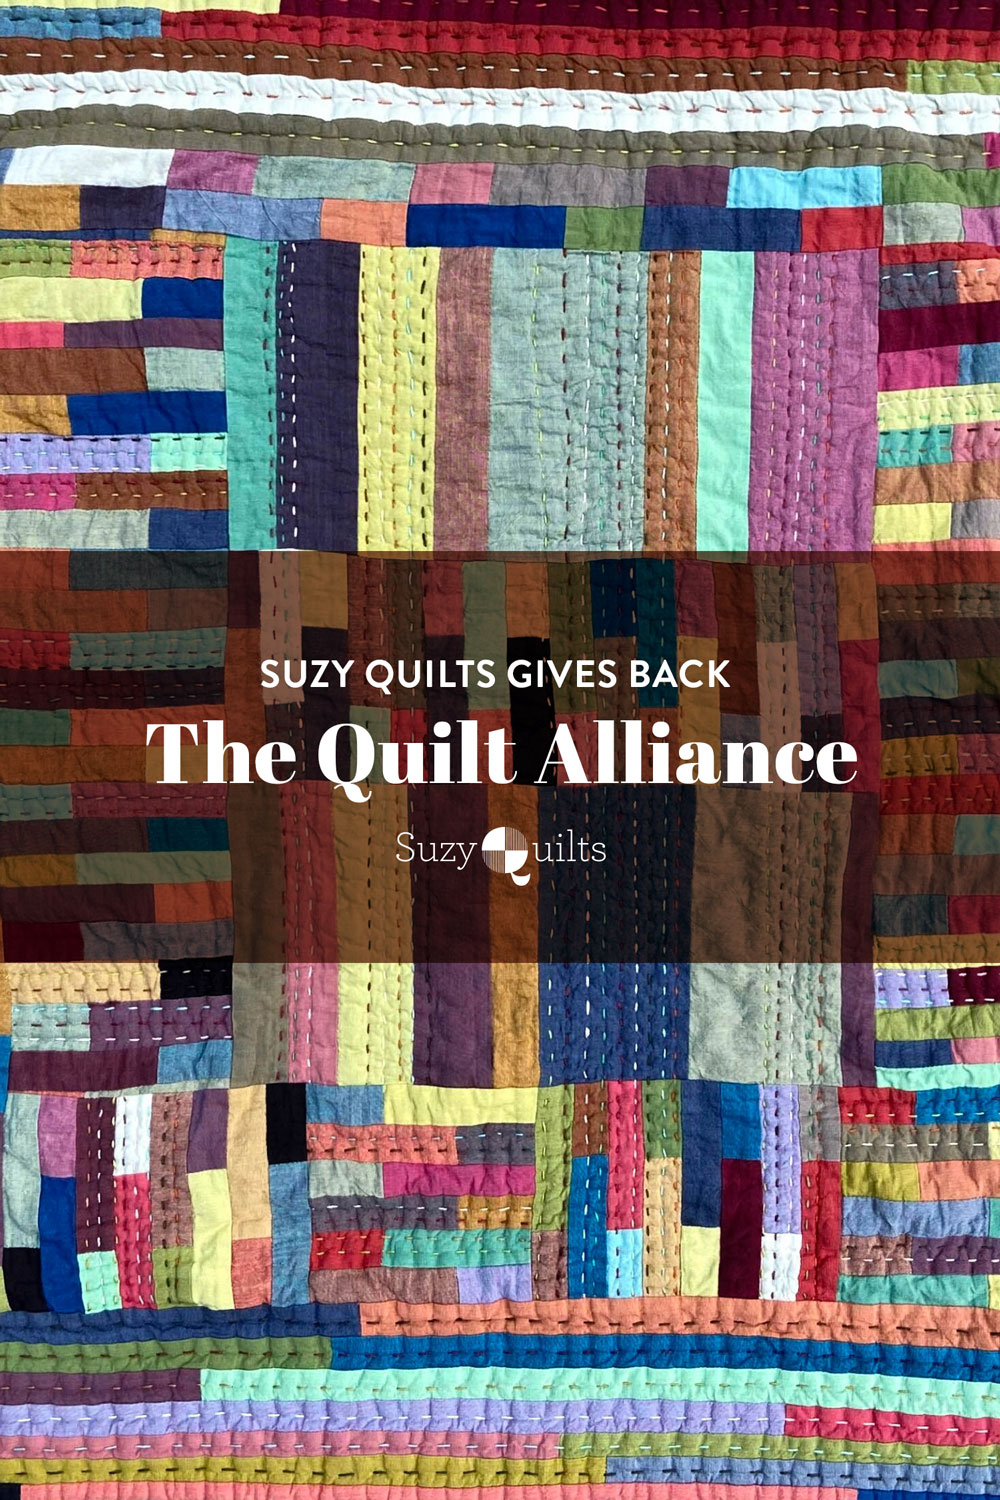 The Quilt Alliance is one of five nonprofits Suzy Quilts is donating to in 2022. Learn more about their important mission to preserve quilt stories! suzyquilts.com #quilting